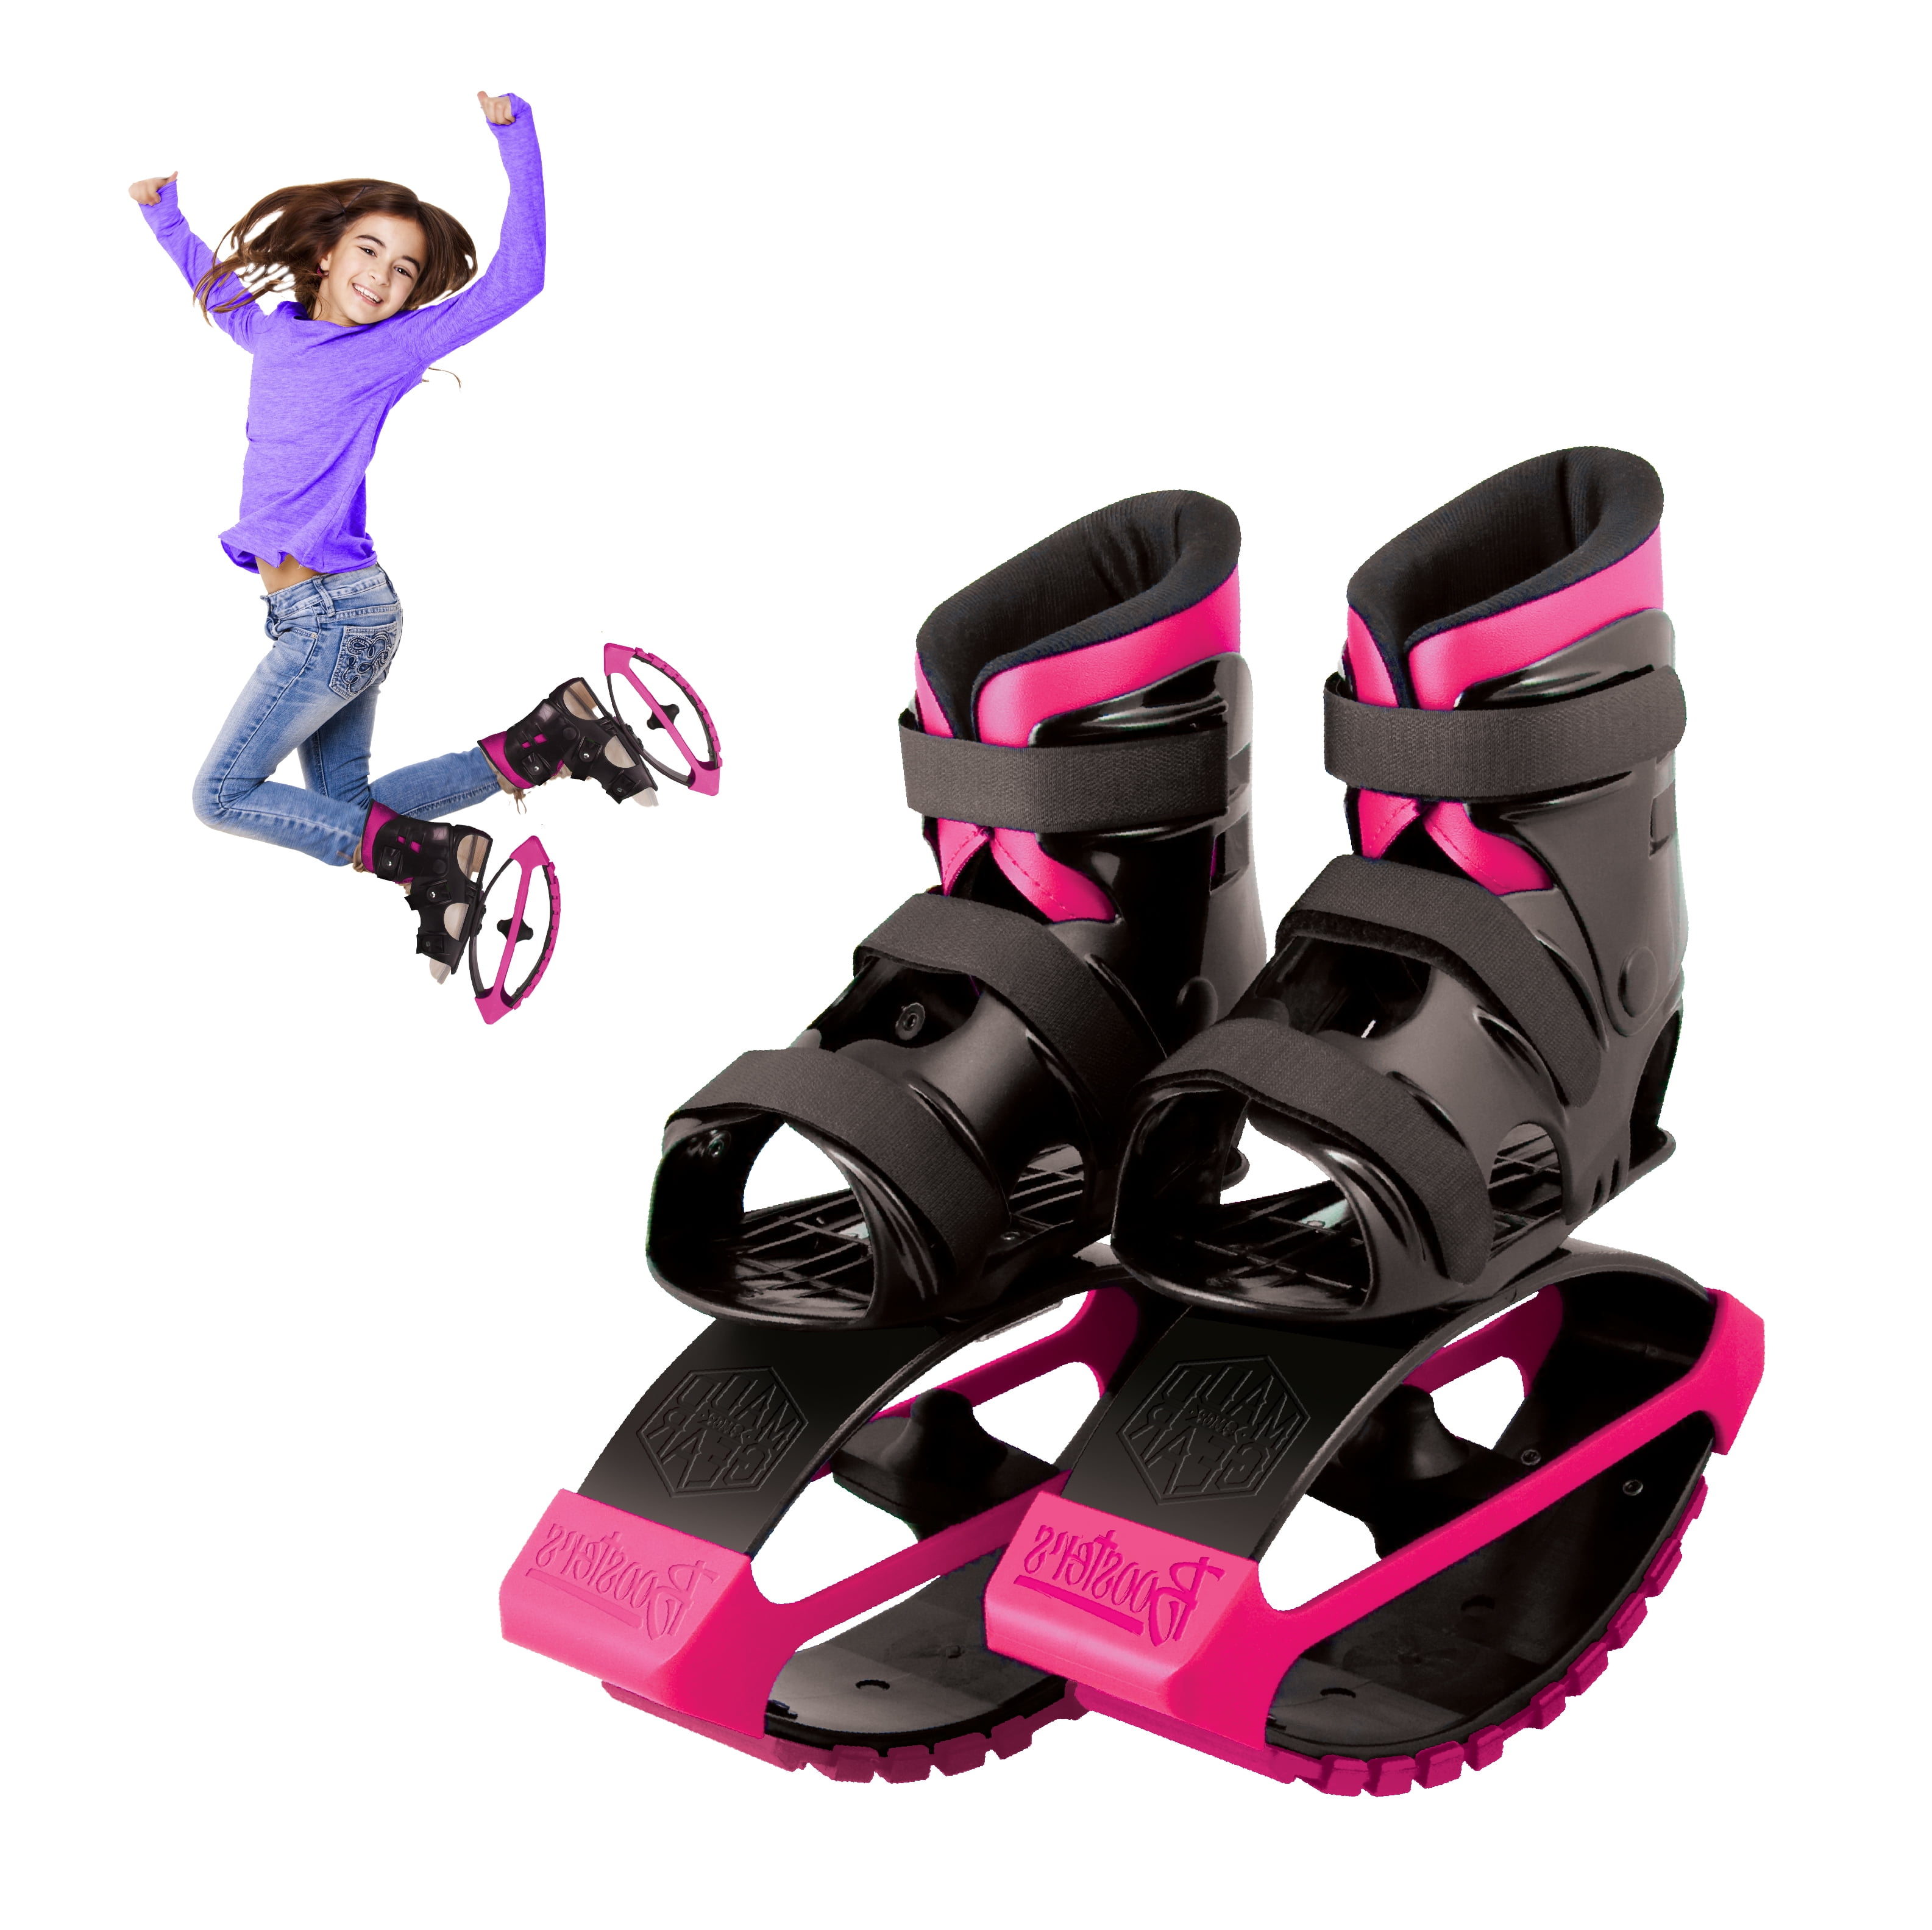 MADD Gear Boosters Bouncing BOOTS Jump Shoes Children Kids Size 3-6 Youth Girls for sale online